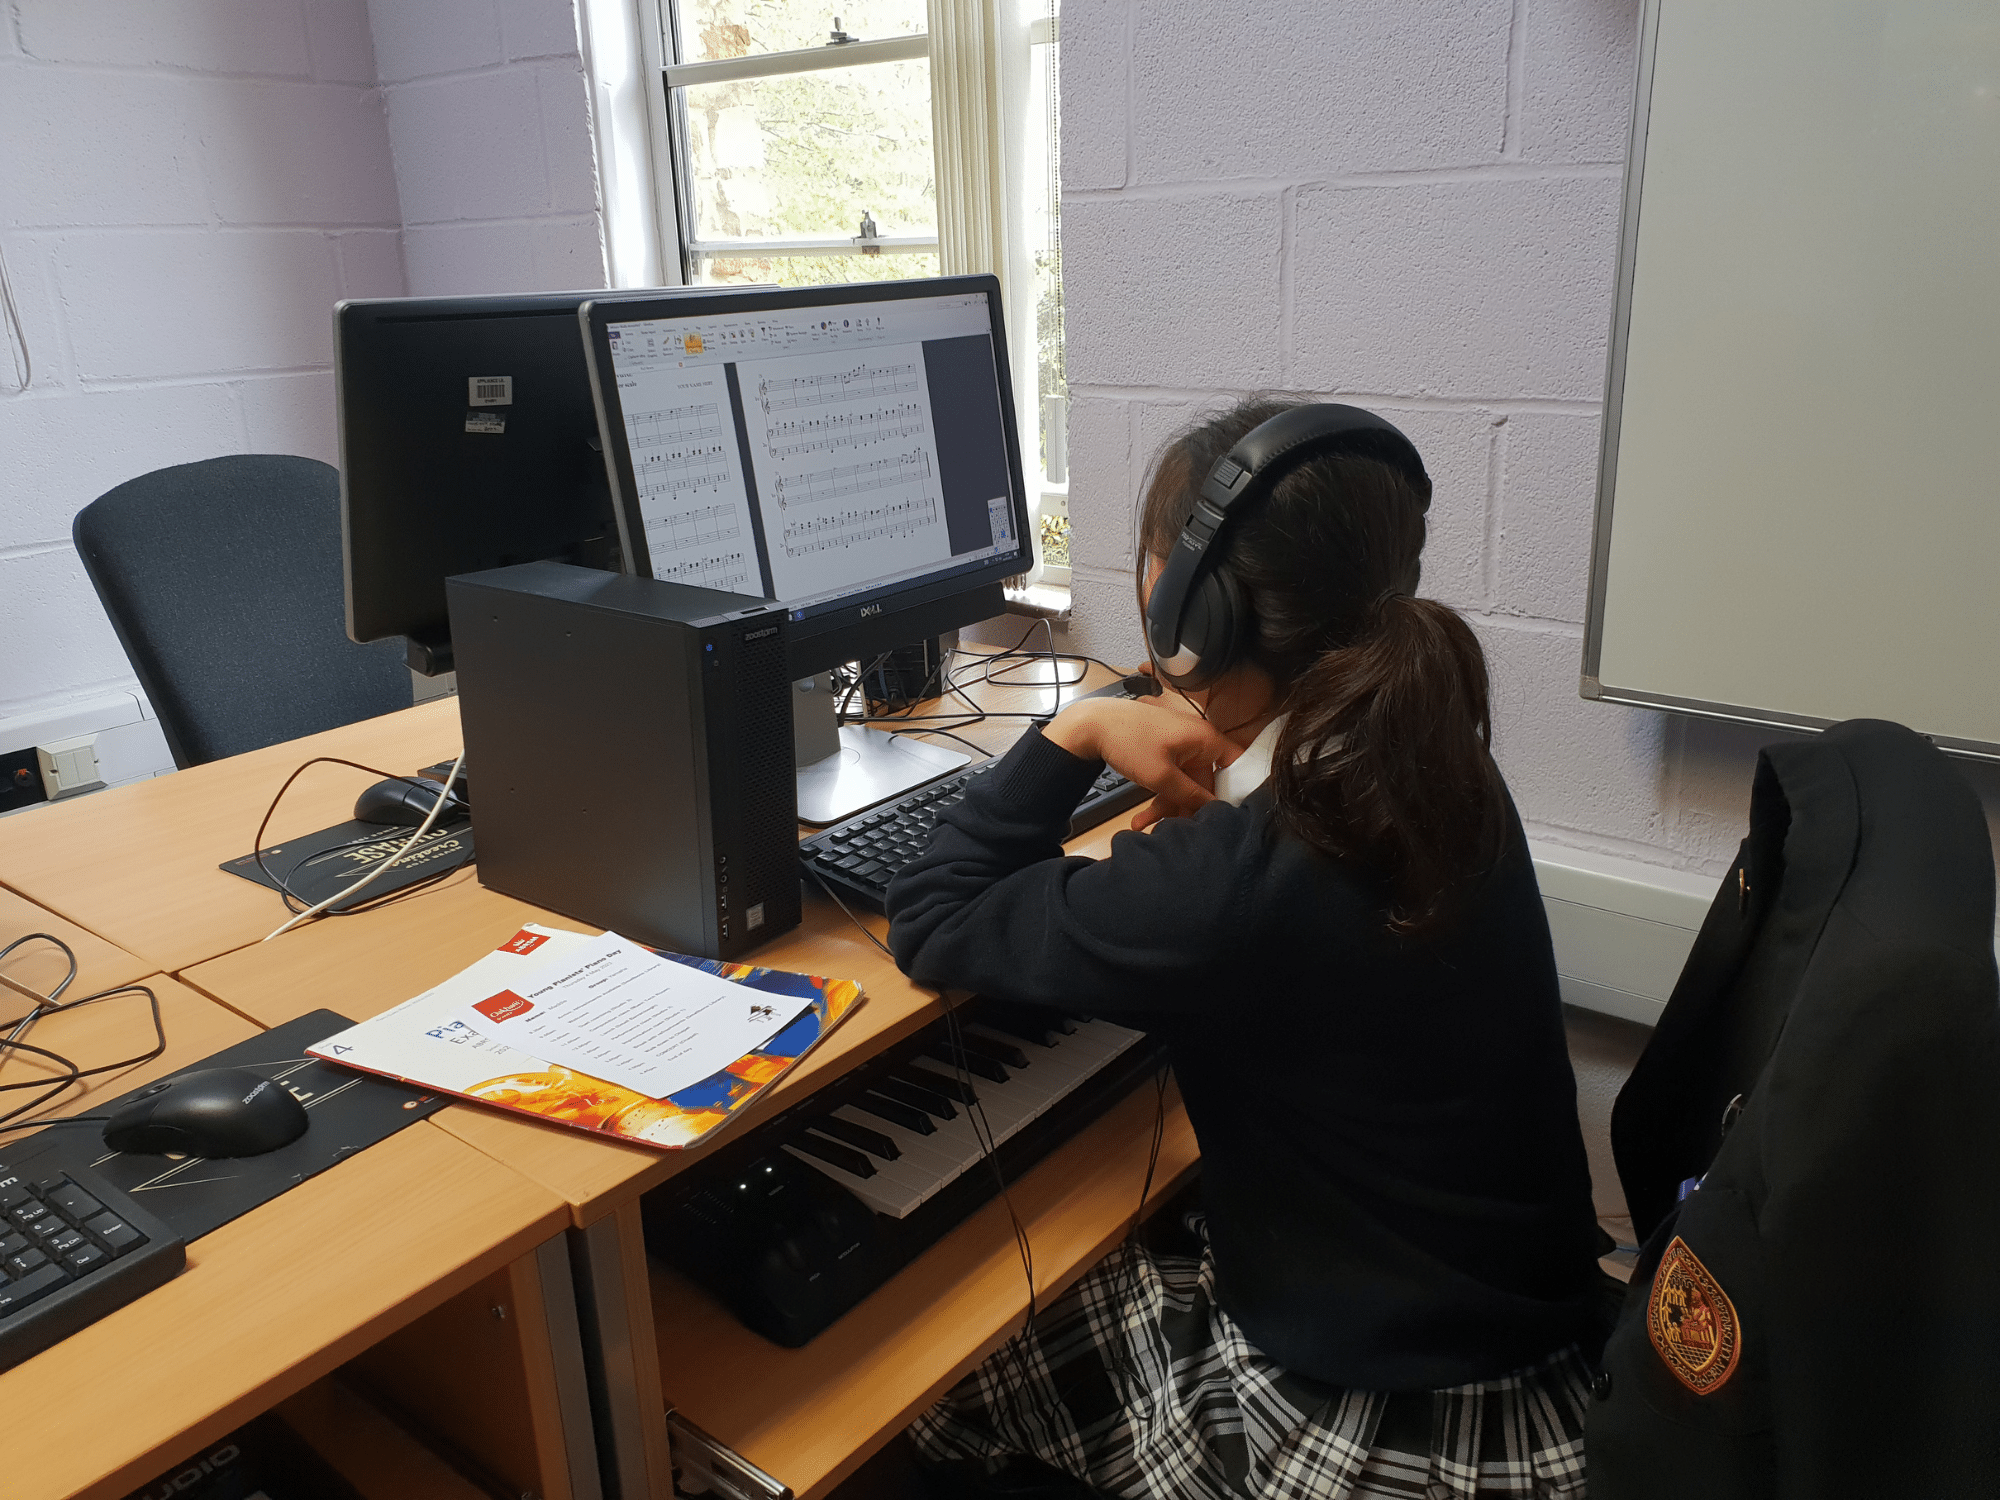 Student composes at computer